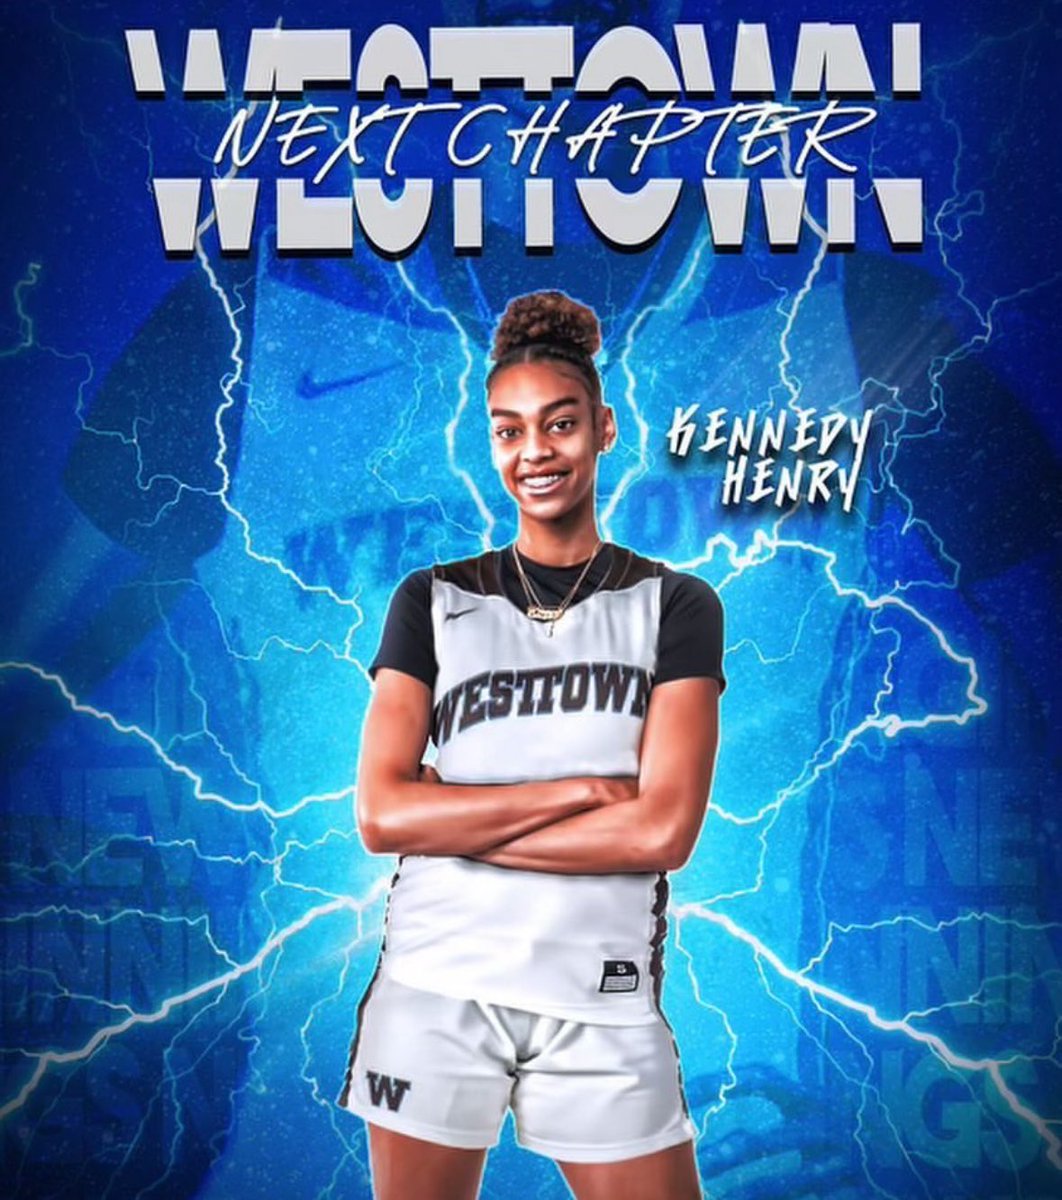 2025 @HokiesWBB commit @KennedyHenryy22 will play for @WTGirlsBball next year, per her Instagram page. The 6-foot guard avg. 20.0 ppg, 7.6 rpg, 2.7 spg & 3.5 spg in leading @blairbucs to the 2024 @MAPLAthletics title. Scored 35 in the title game. Has scored 1,074 career points